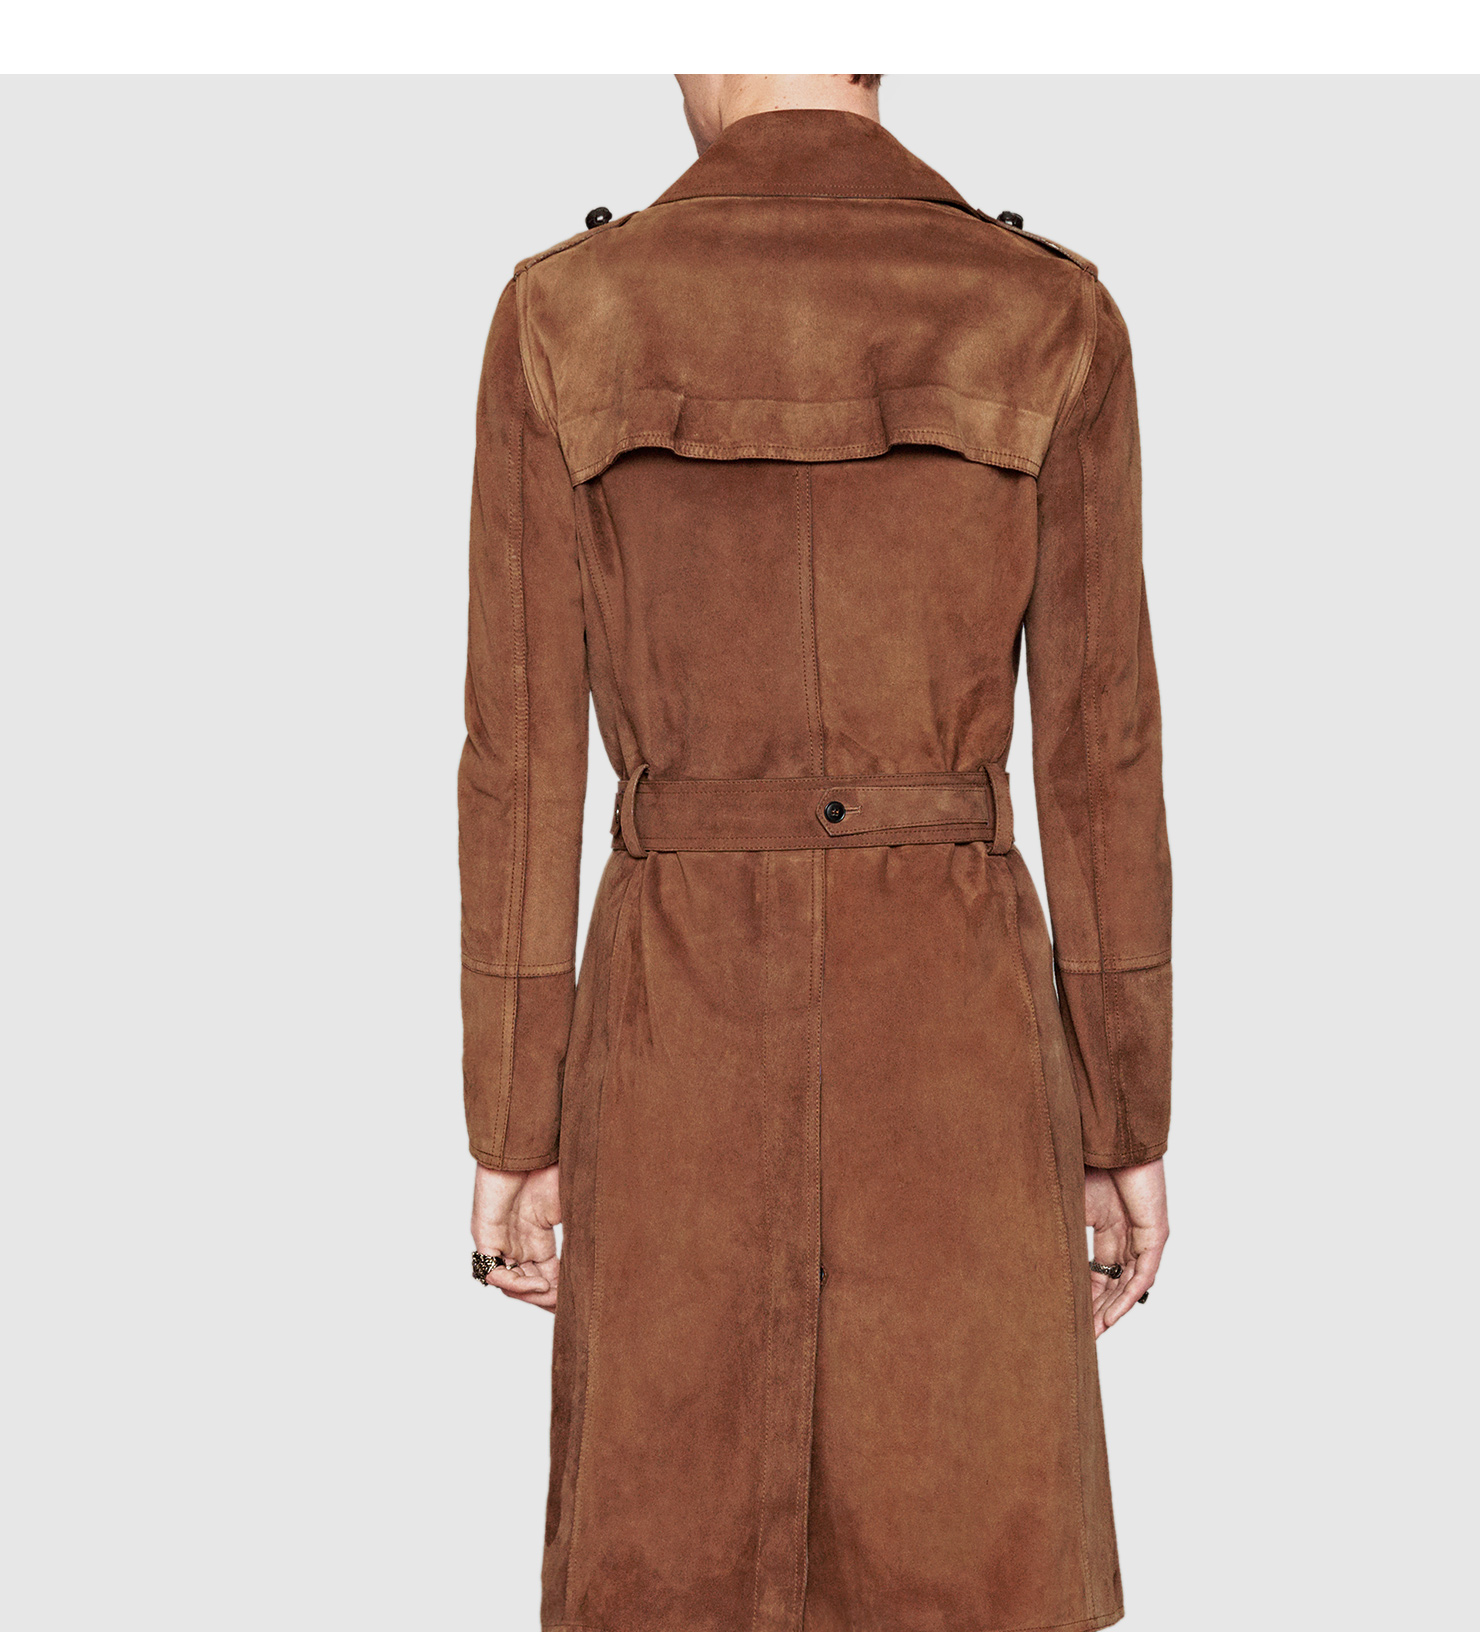 Gucci Suede Trench Coat in Brown for Men - Lyst